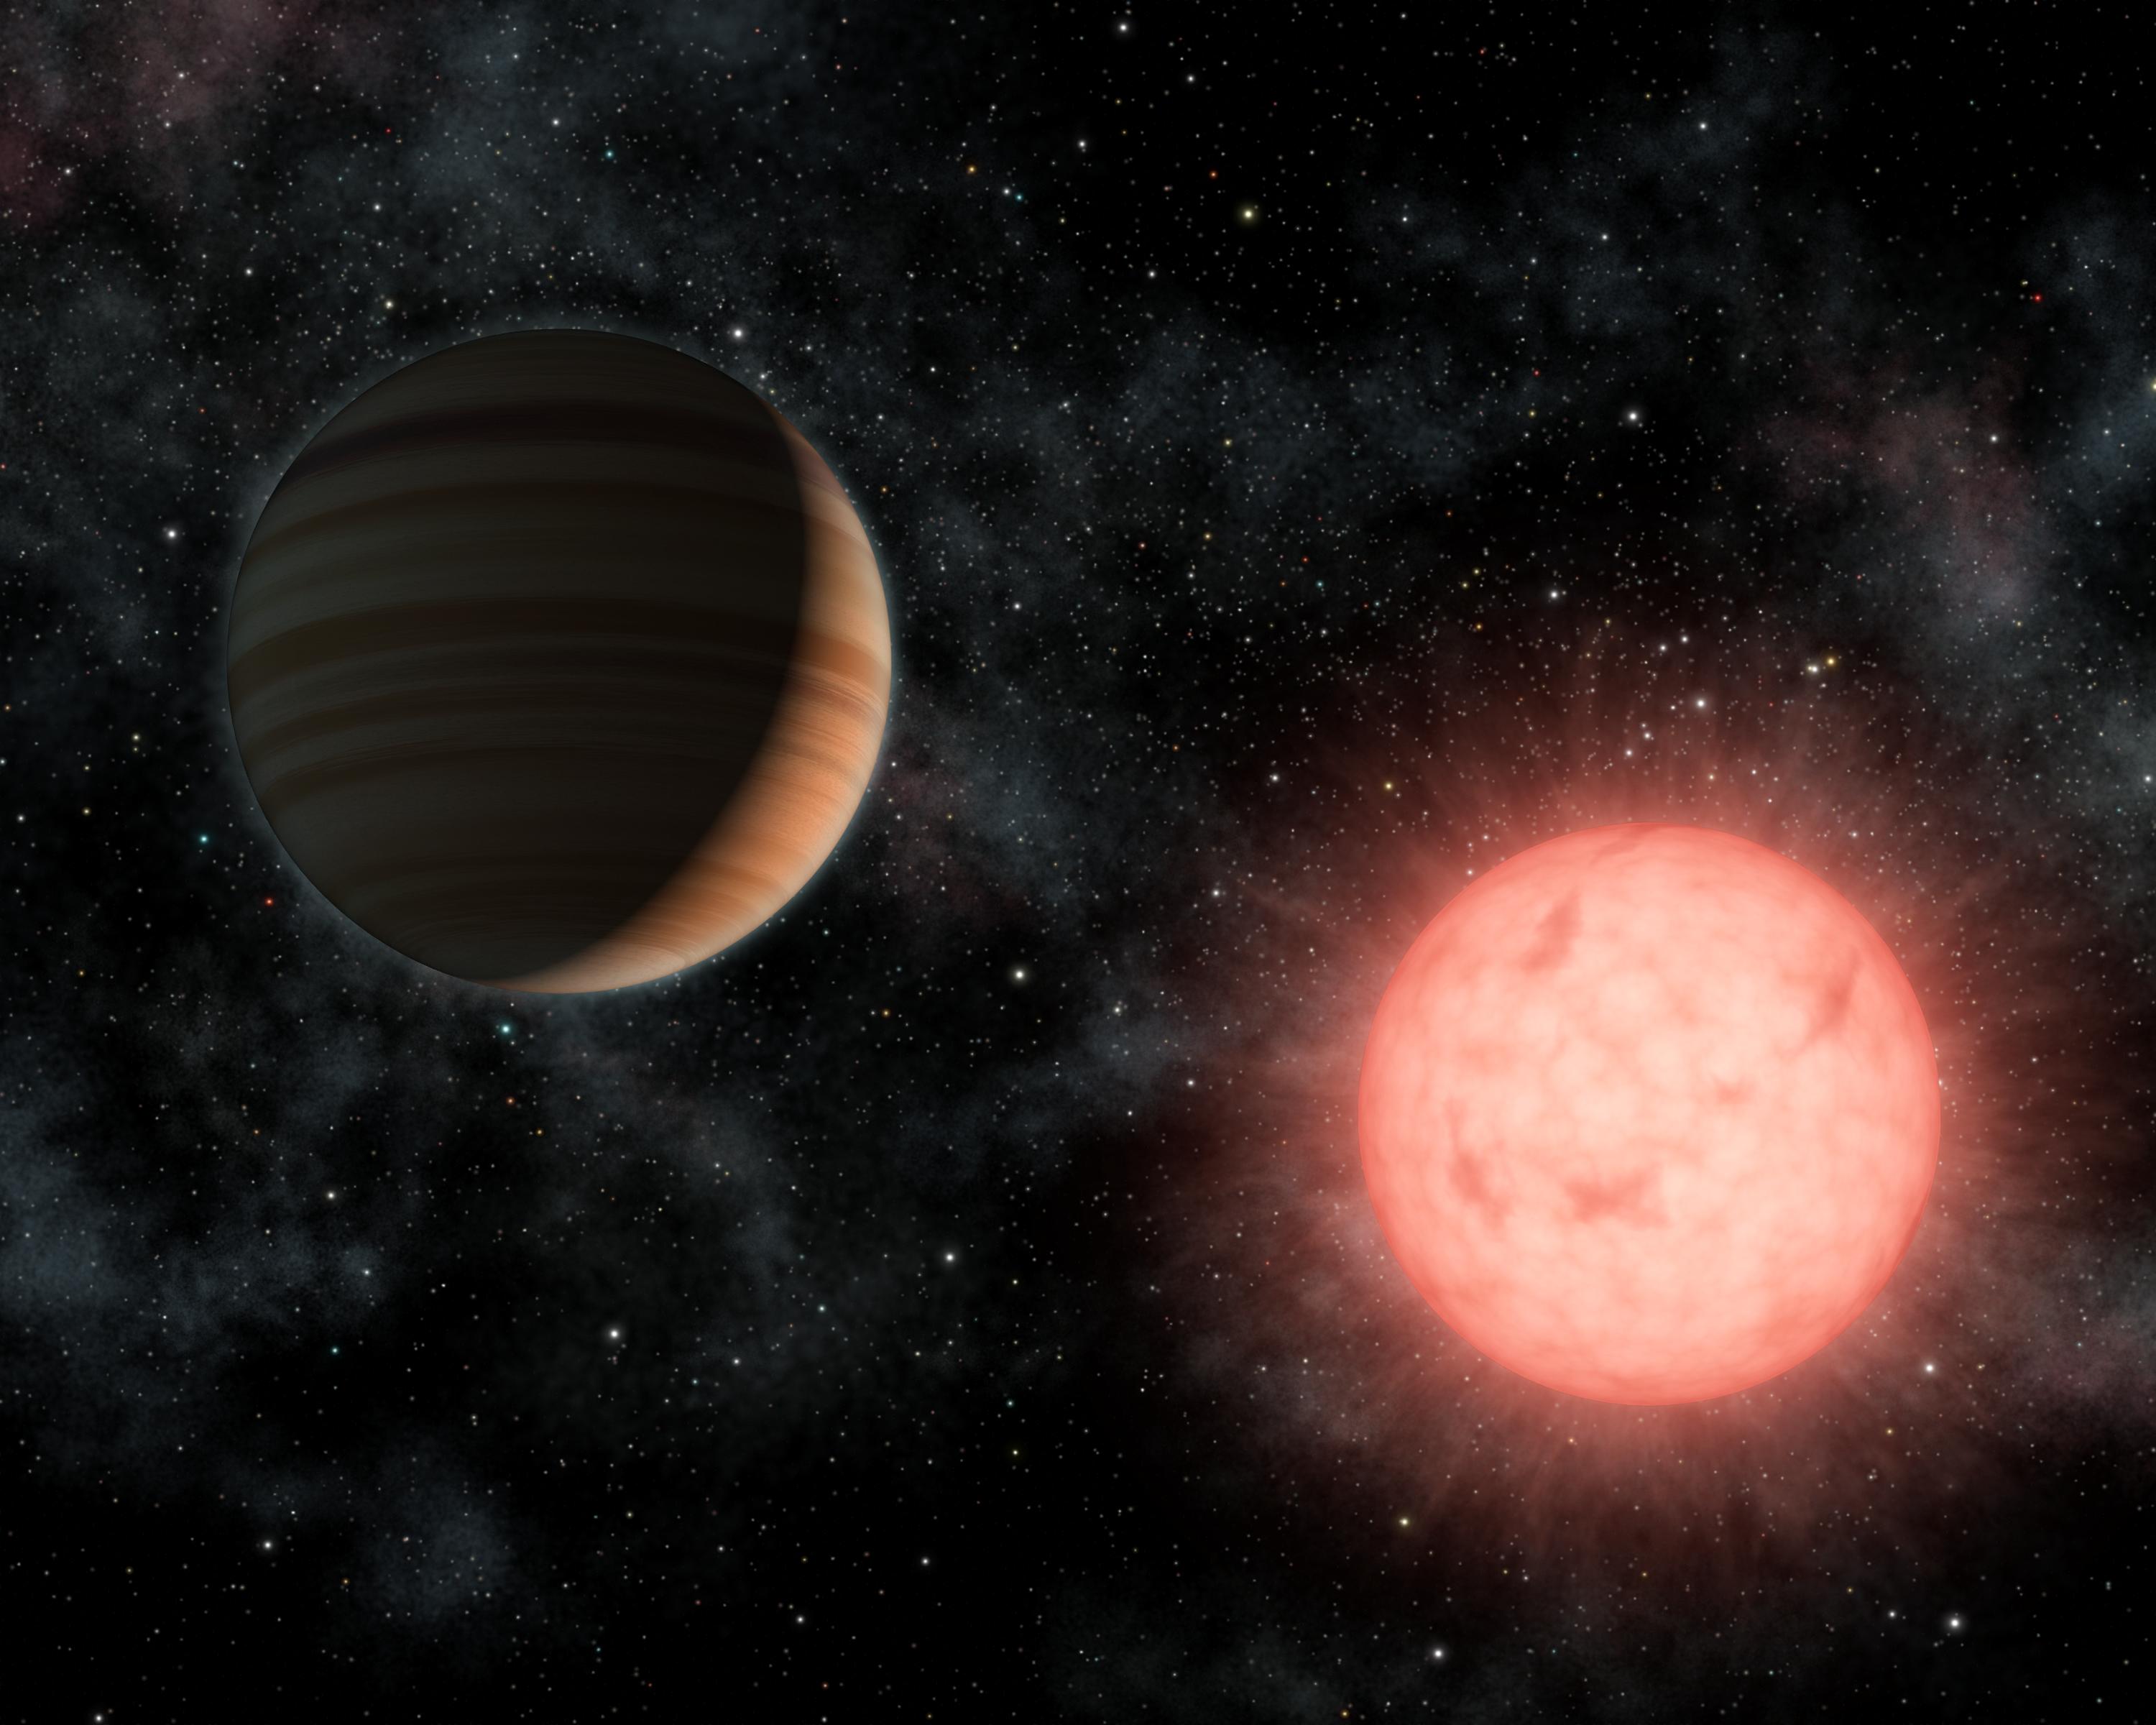 VB 10: A Large Planet Orbiting a Small Star